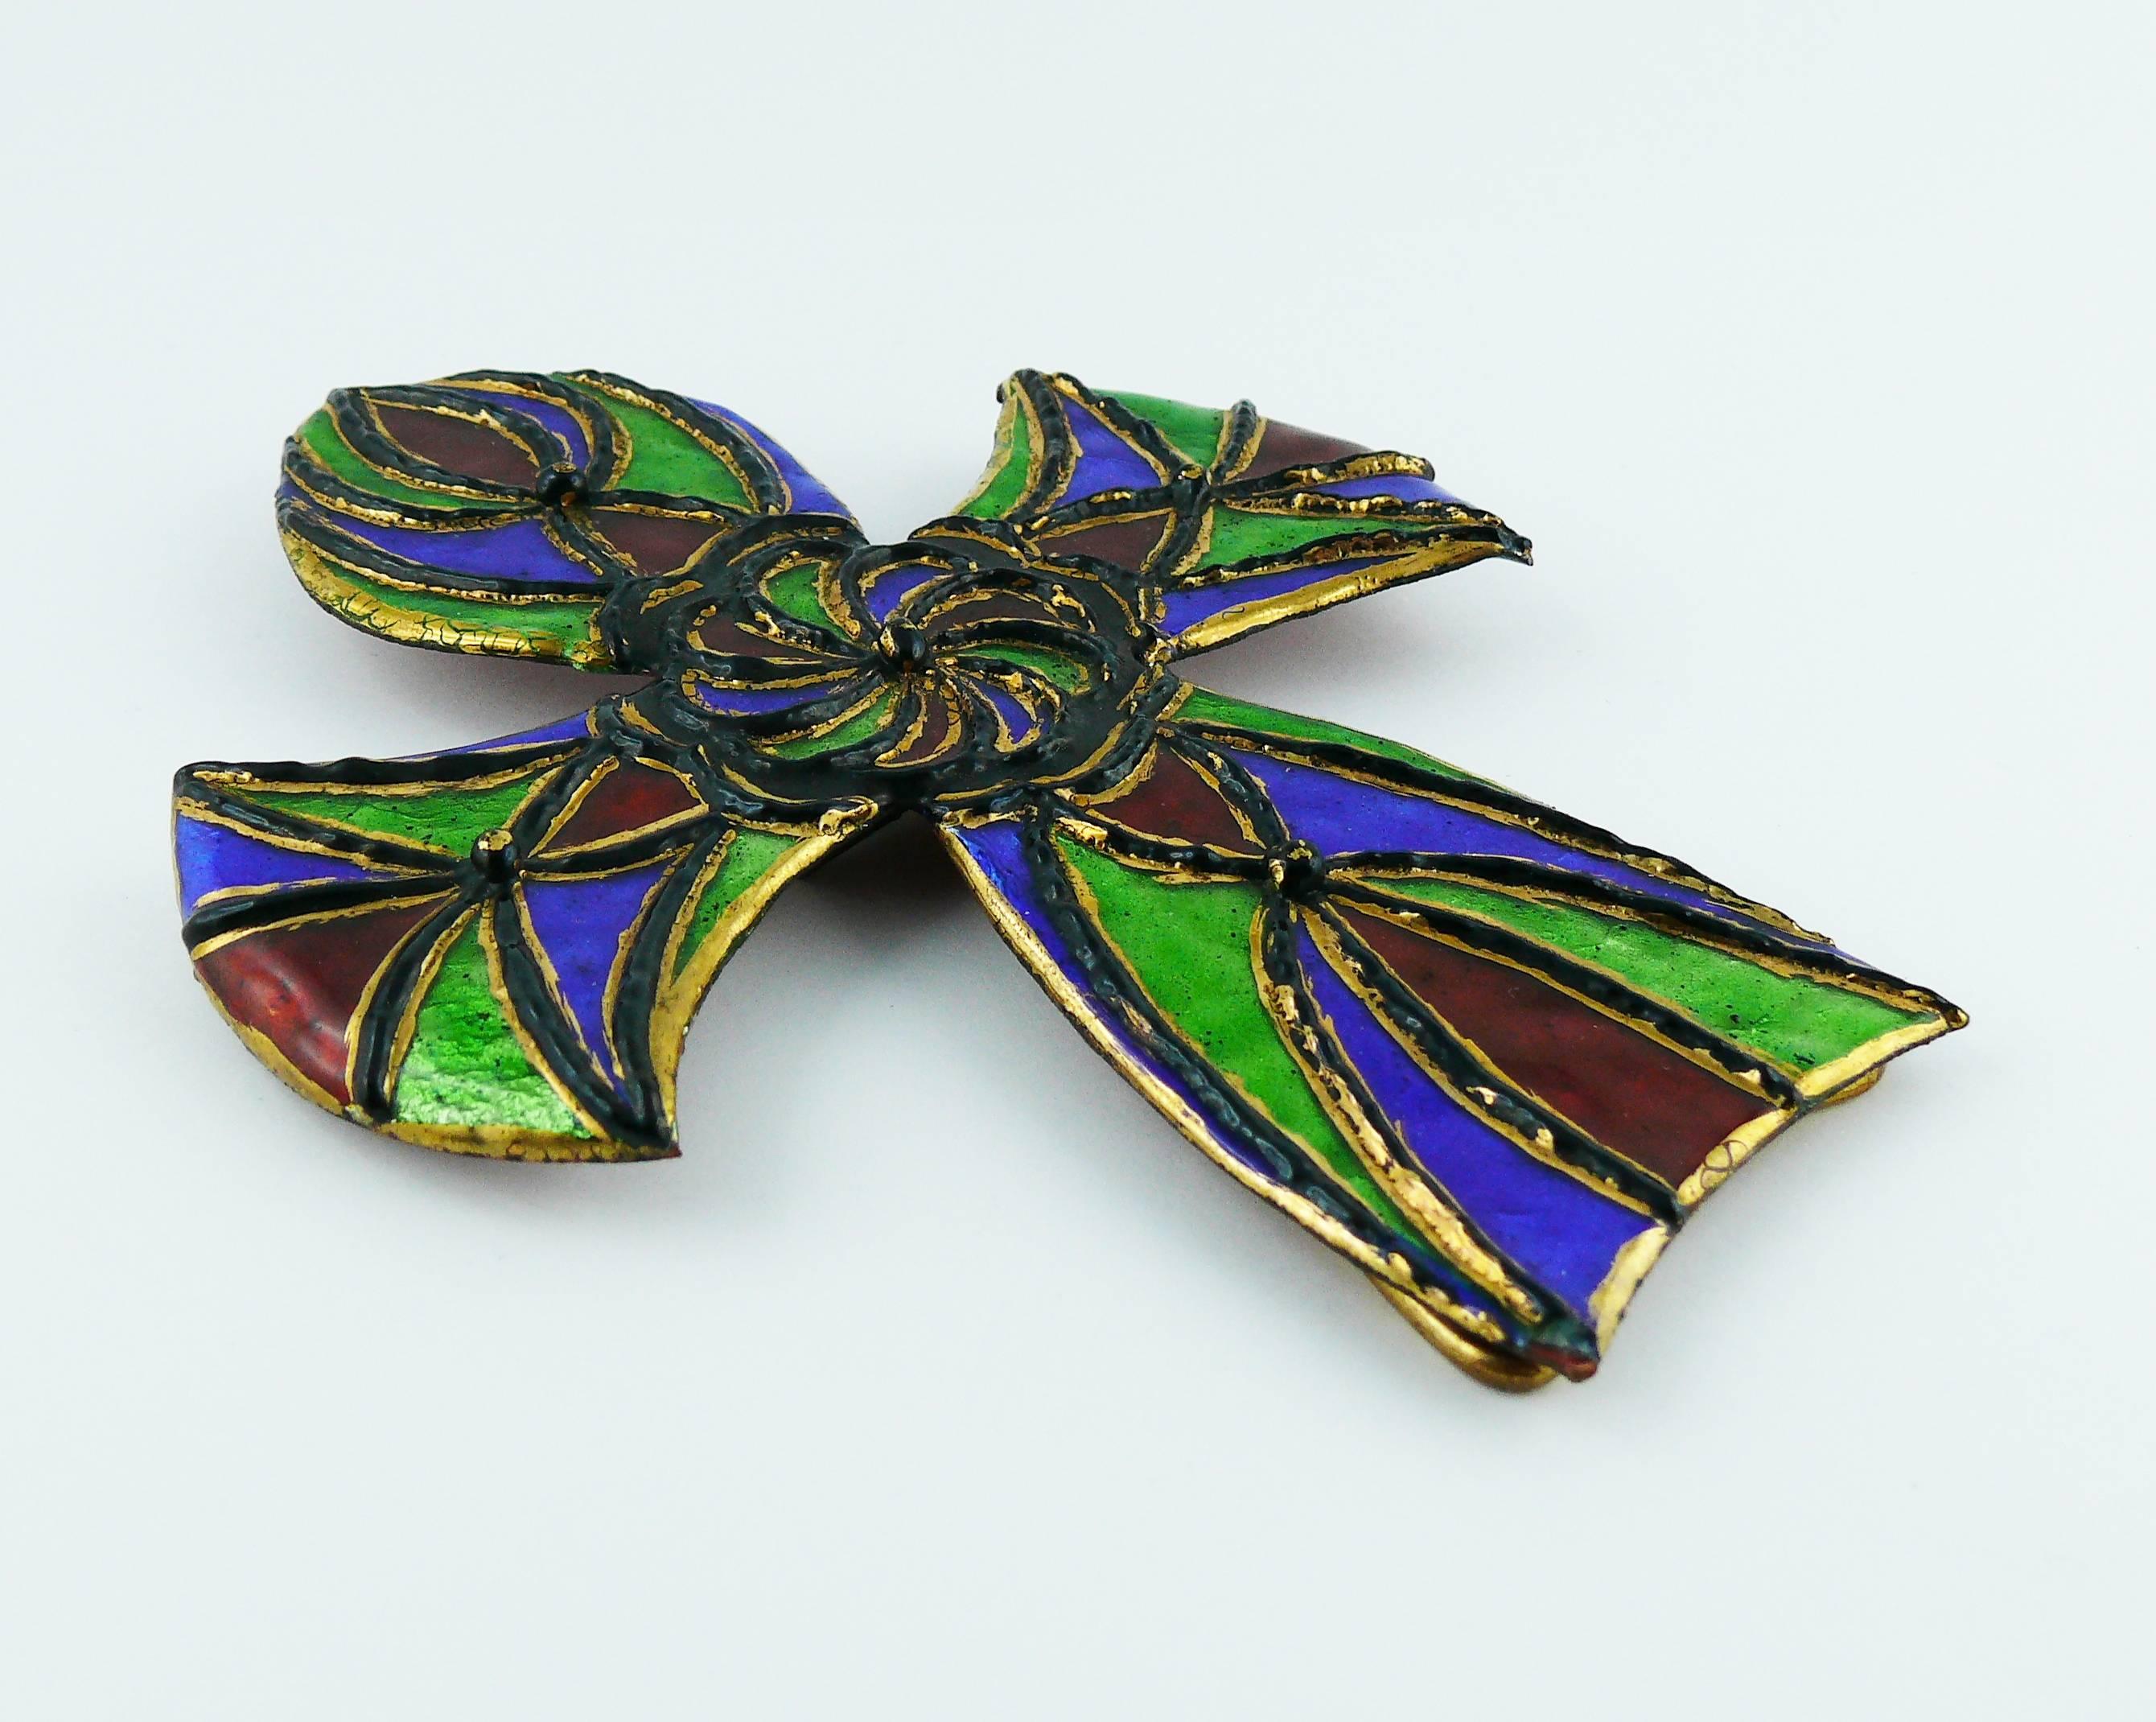 ANDREE BAZOT rare vintage massive cross pendant featuring multicolored enamels on a copper structure, enhanced with gilt and cloisonné in imitation of stained glass.

This cross has a bail and can be worn as a pendant. It can also stand as as